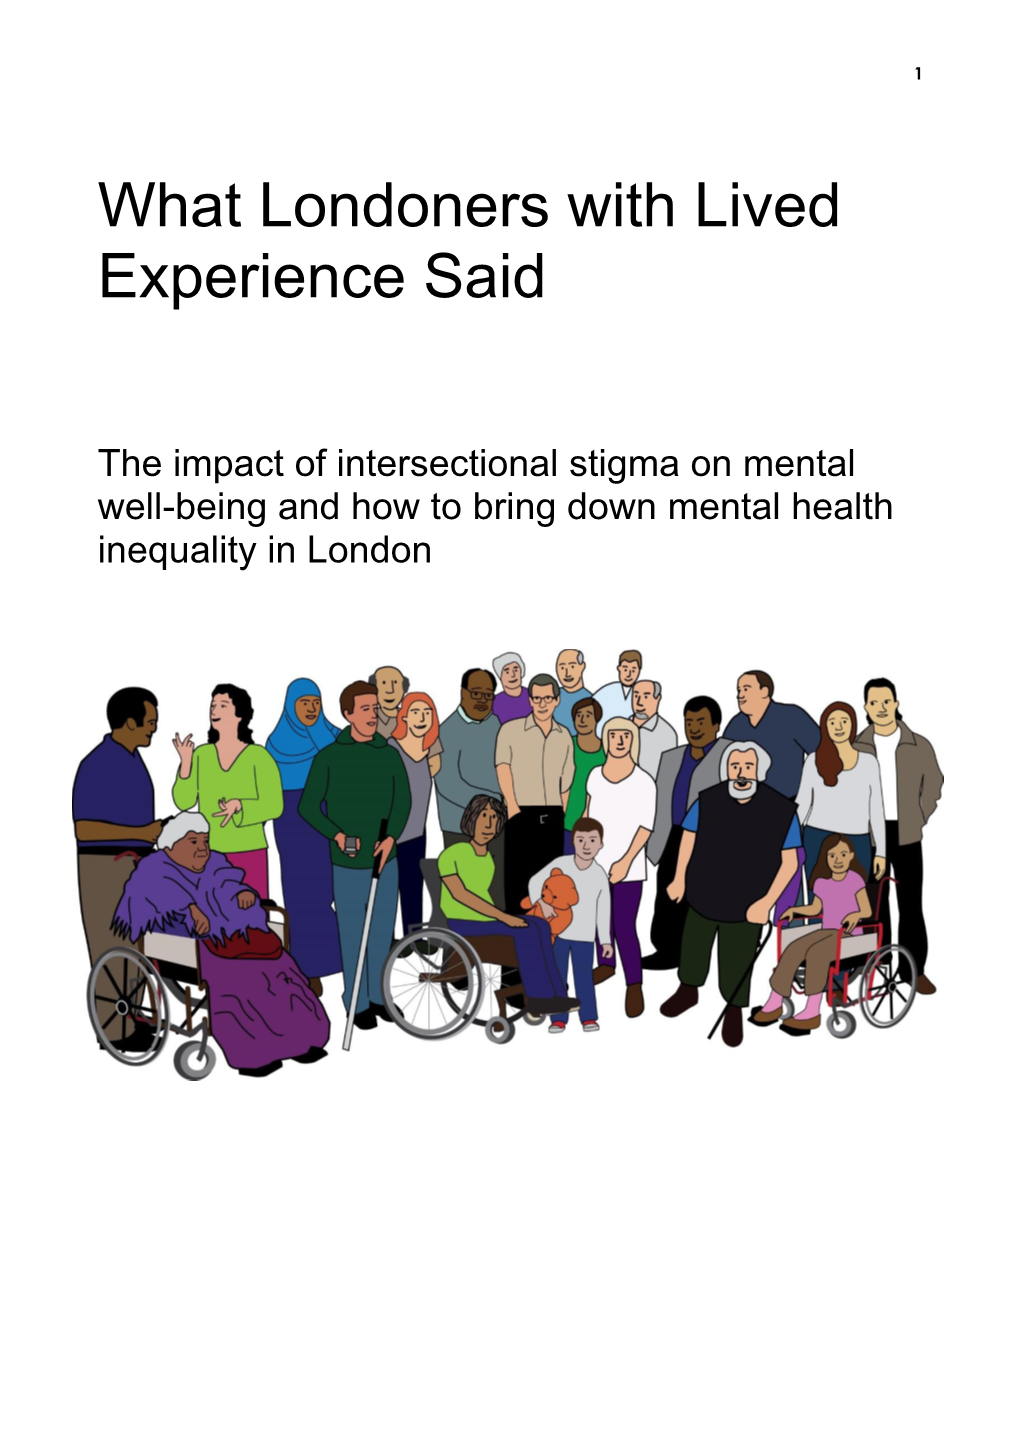 What Londoners with Lived Experience Said